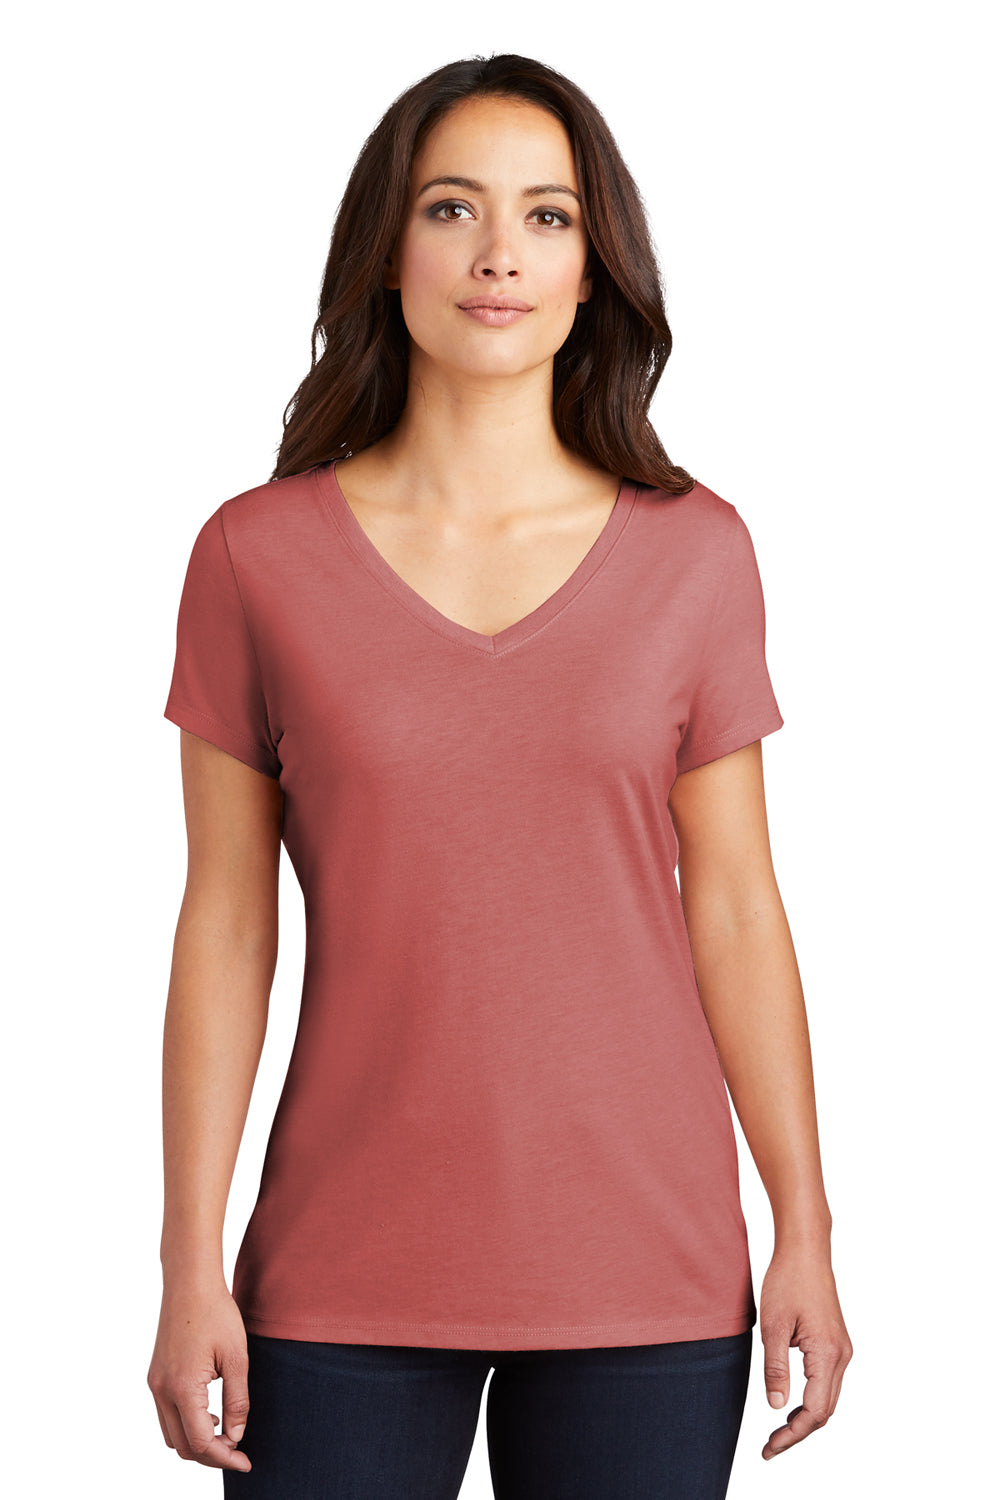 District DM1350L Womens Perfect Tri Short Sleeve V-Neck T-Shirt Blush Frost Front